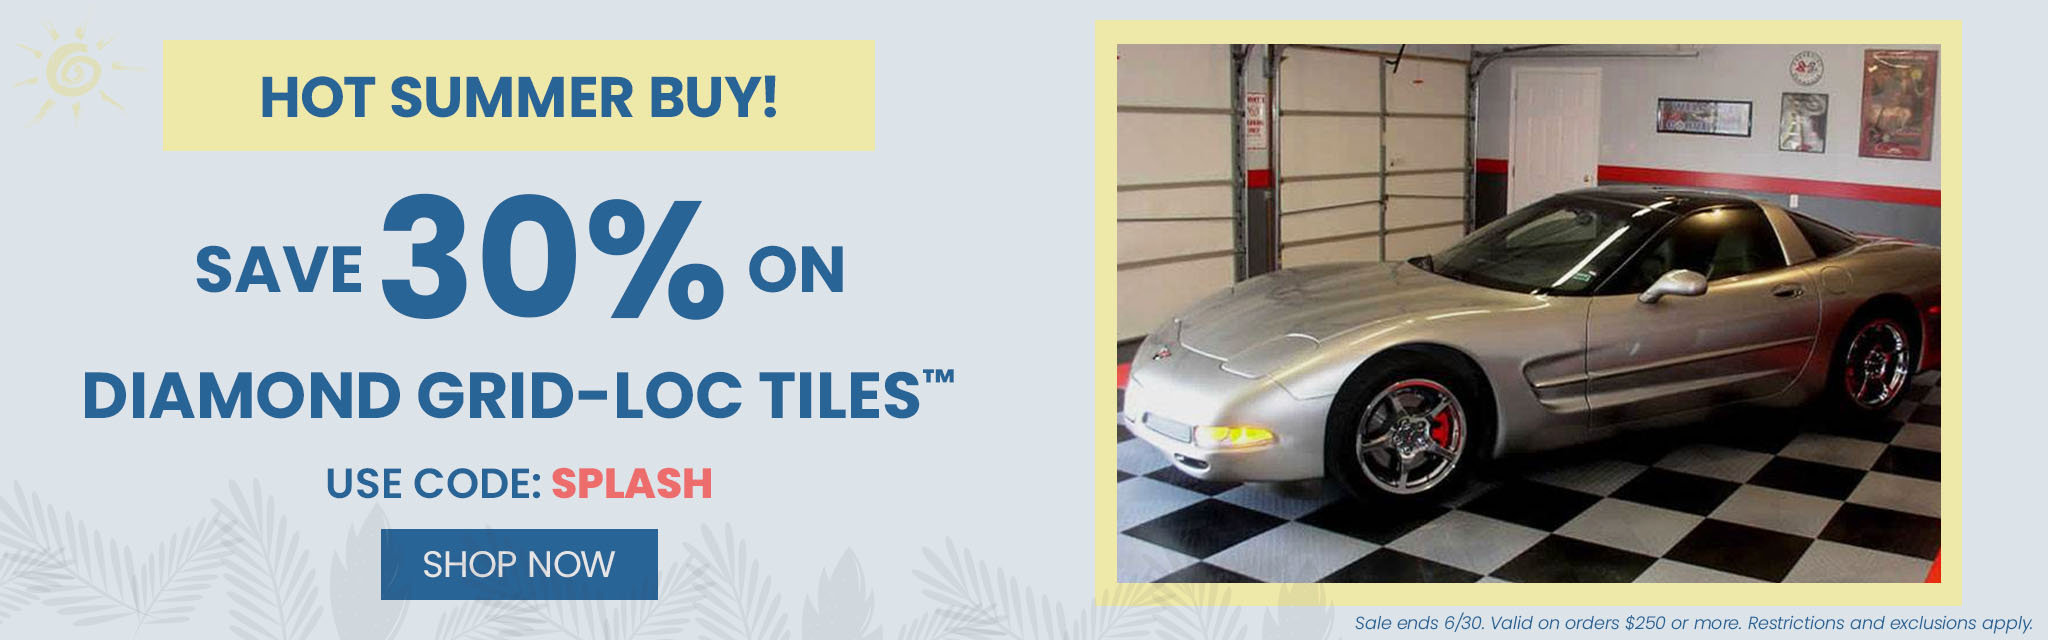 Hot Summer Buy! Save 30% On Diamond Grid-Lock Tiles TM. Use Code: SPLASH. Shop Now. Sale ends 6/30. Valid on orders $250 or more. Restrictions and exclusions apply. 